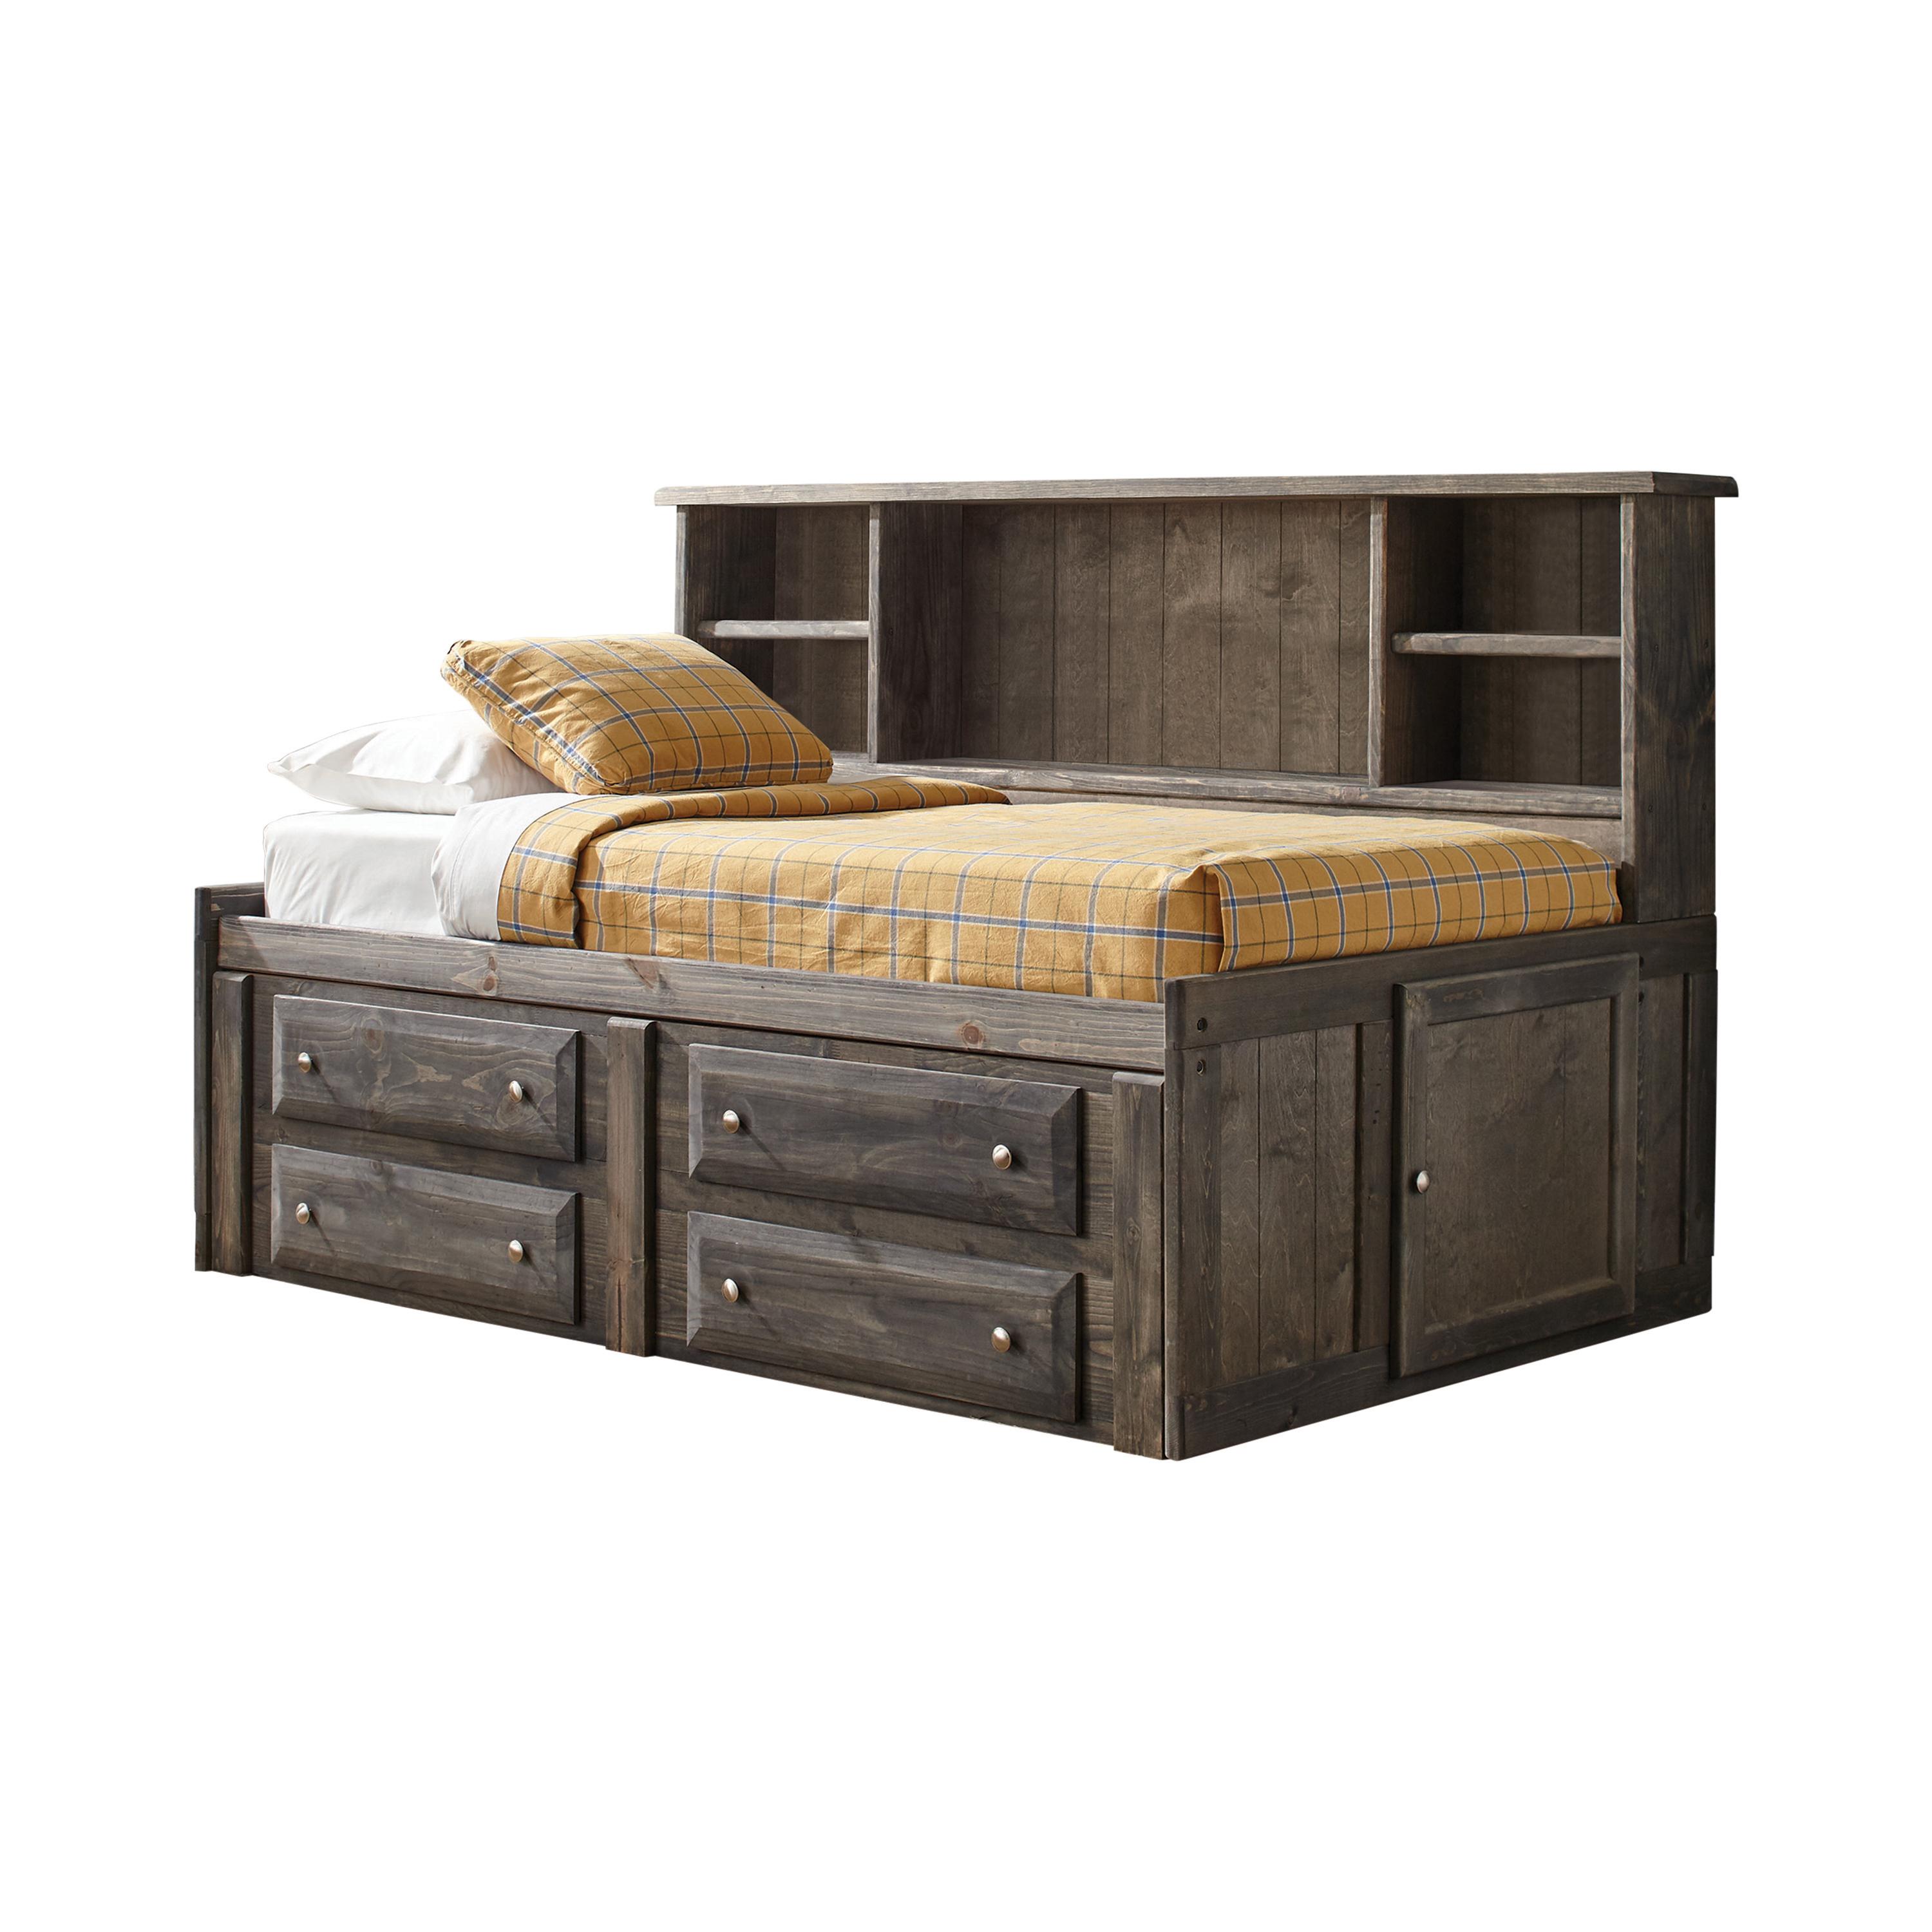 Transitional Storage Daybed 400840T Wrangle Hill 400840T in Gunsmoke 